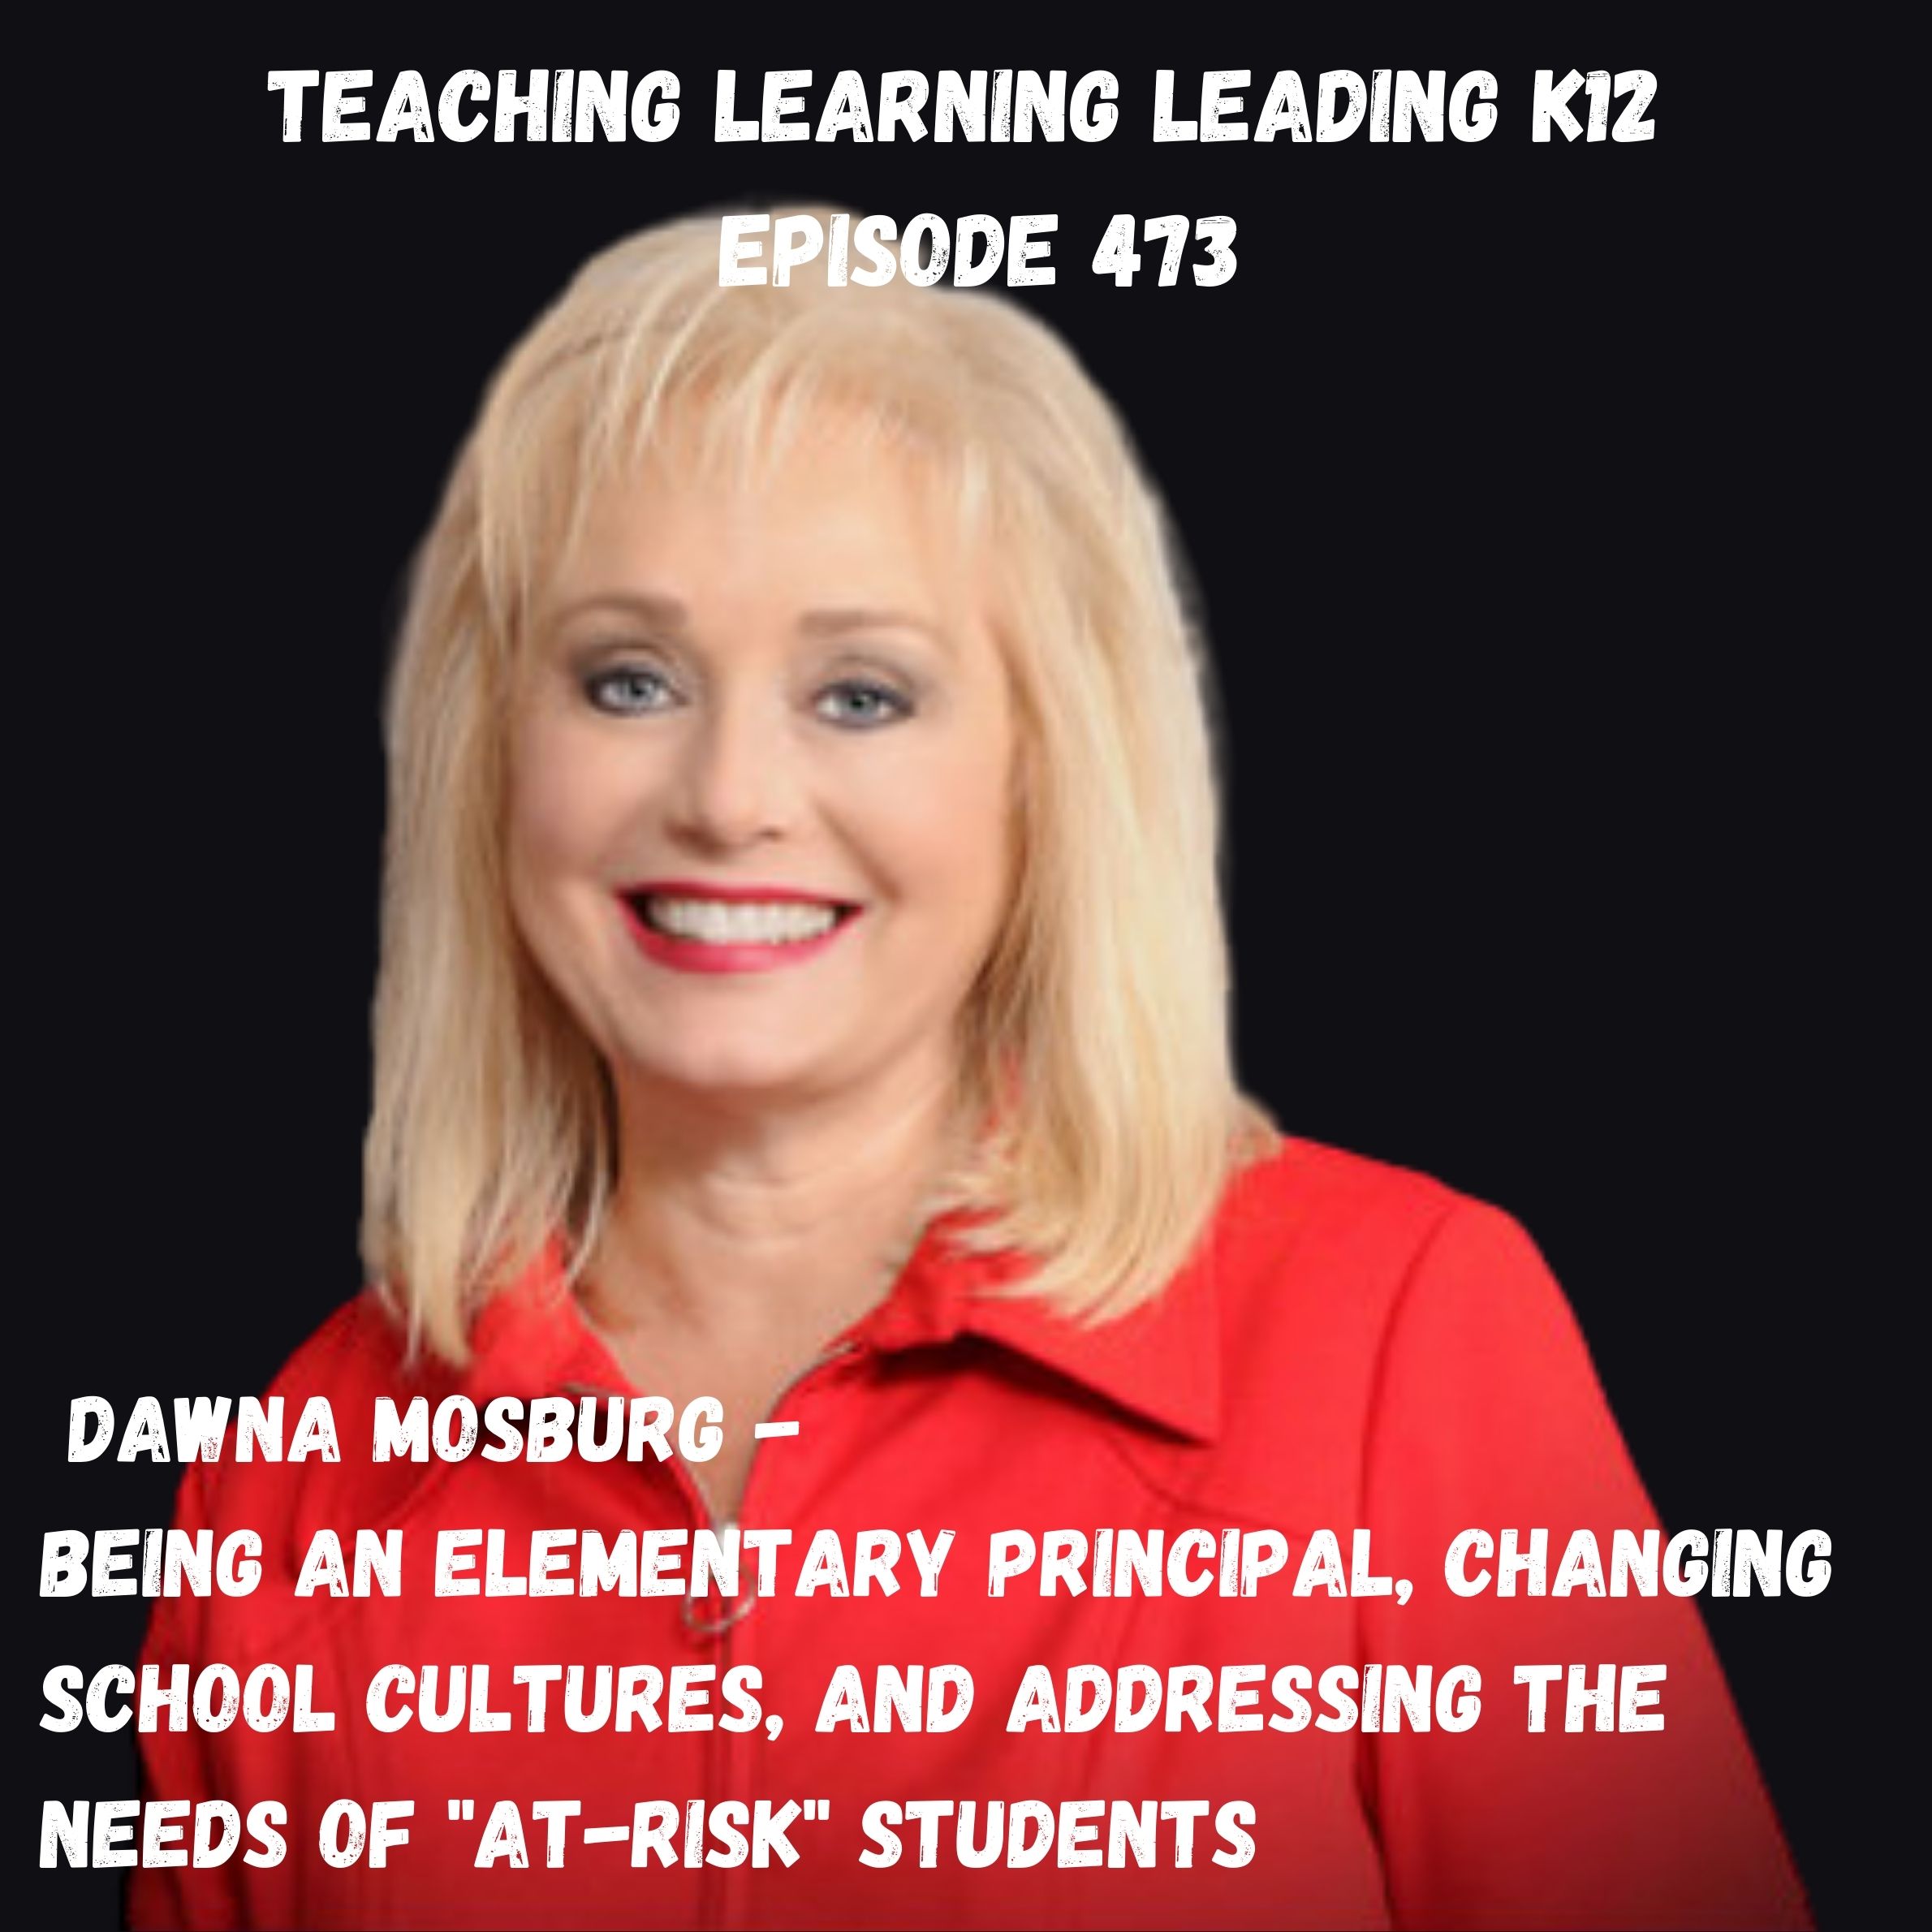 Dawna Mosburg - Being an Elementary School Principal, Changing School Cultures, and Addressing the Needs of ”At-Risk” Students - 473 Image